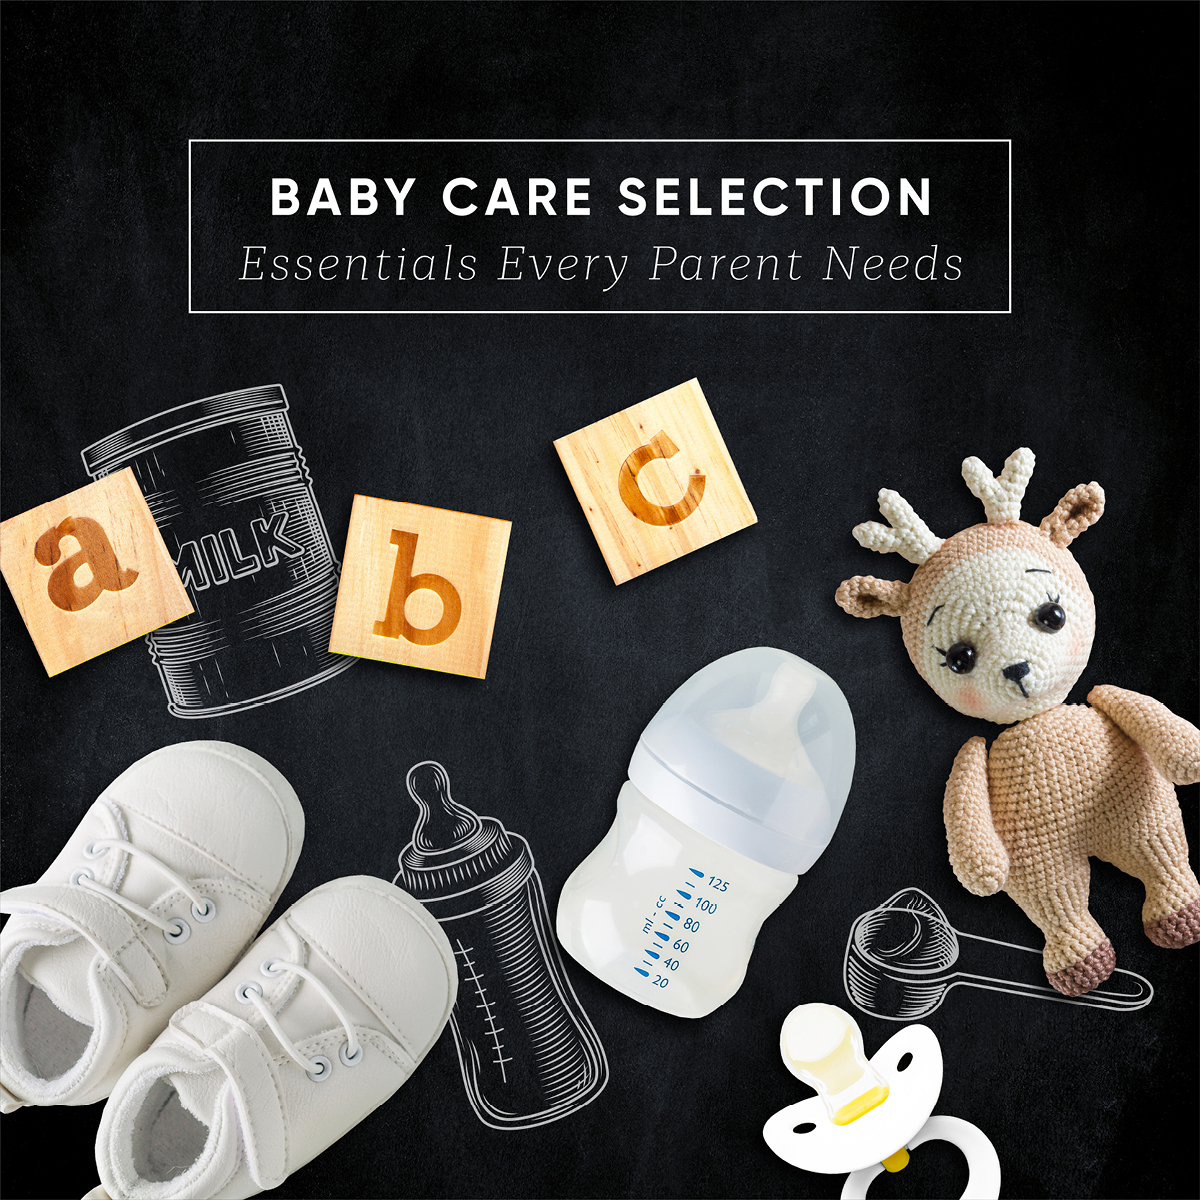 Baby Care Selection (1 – 31 Dec)